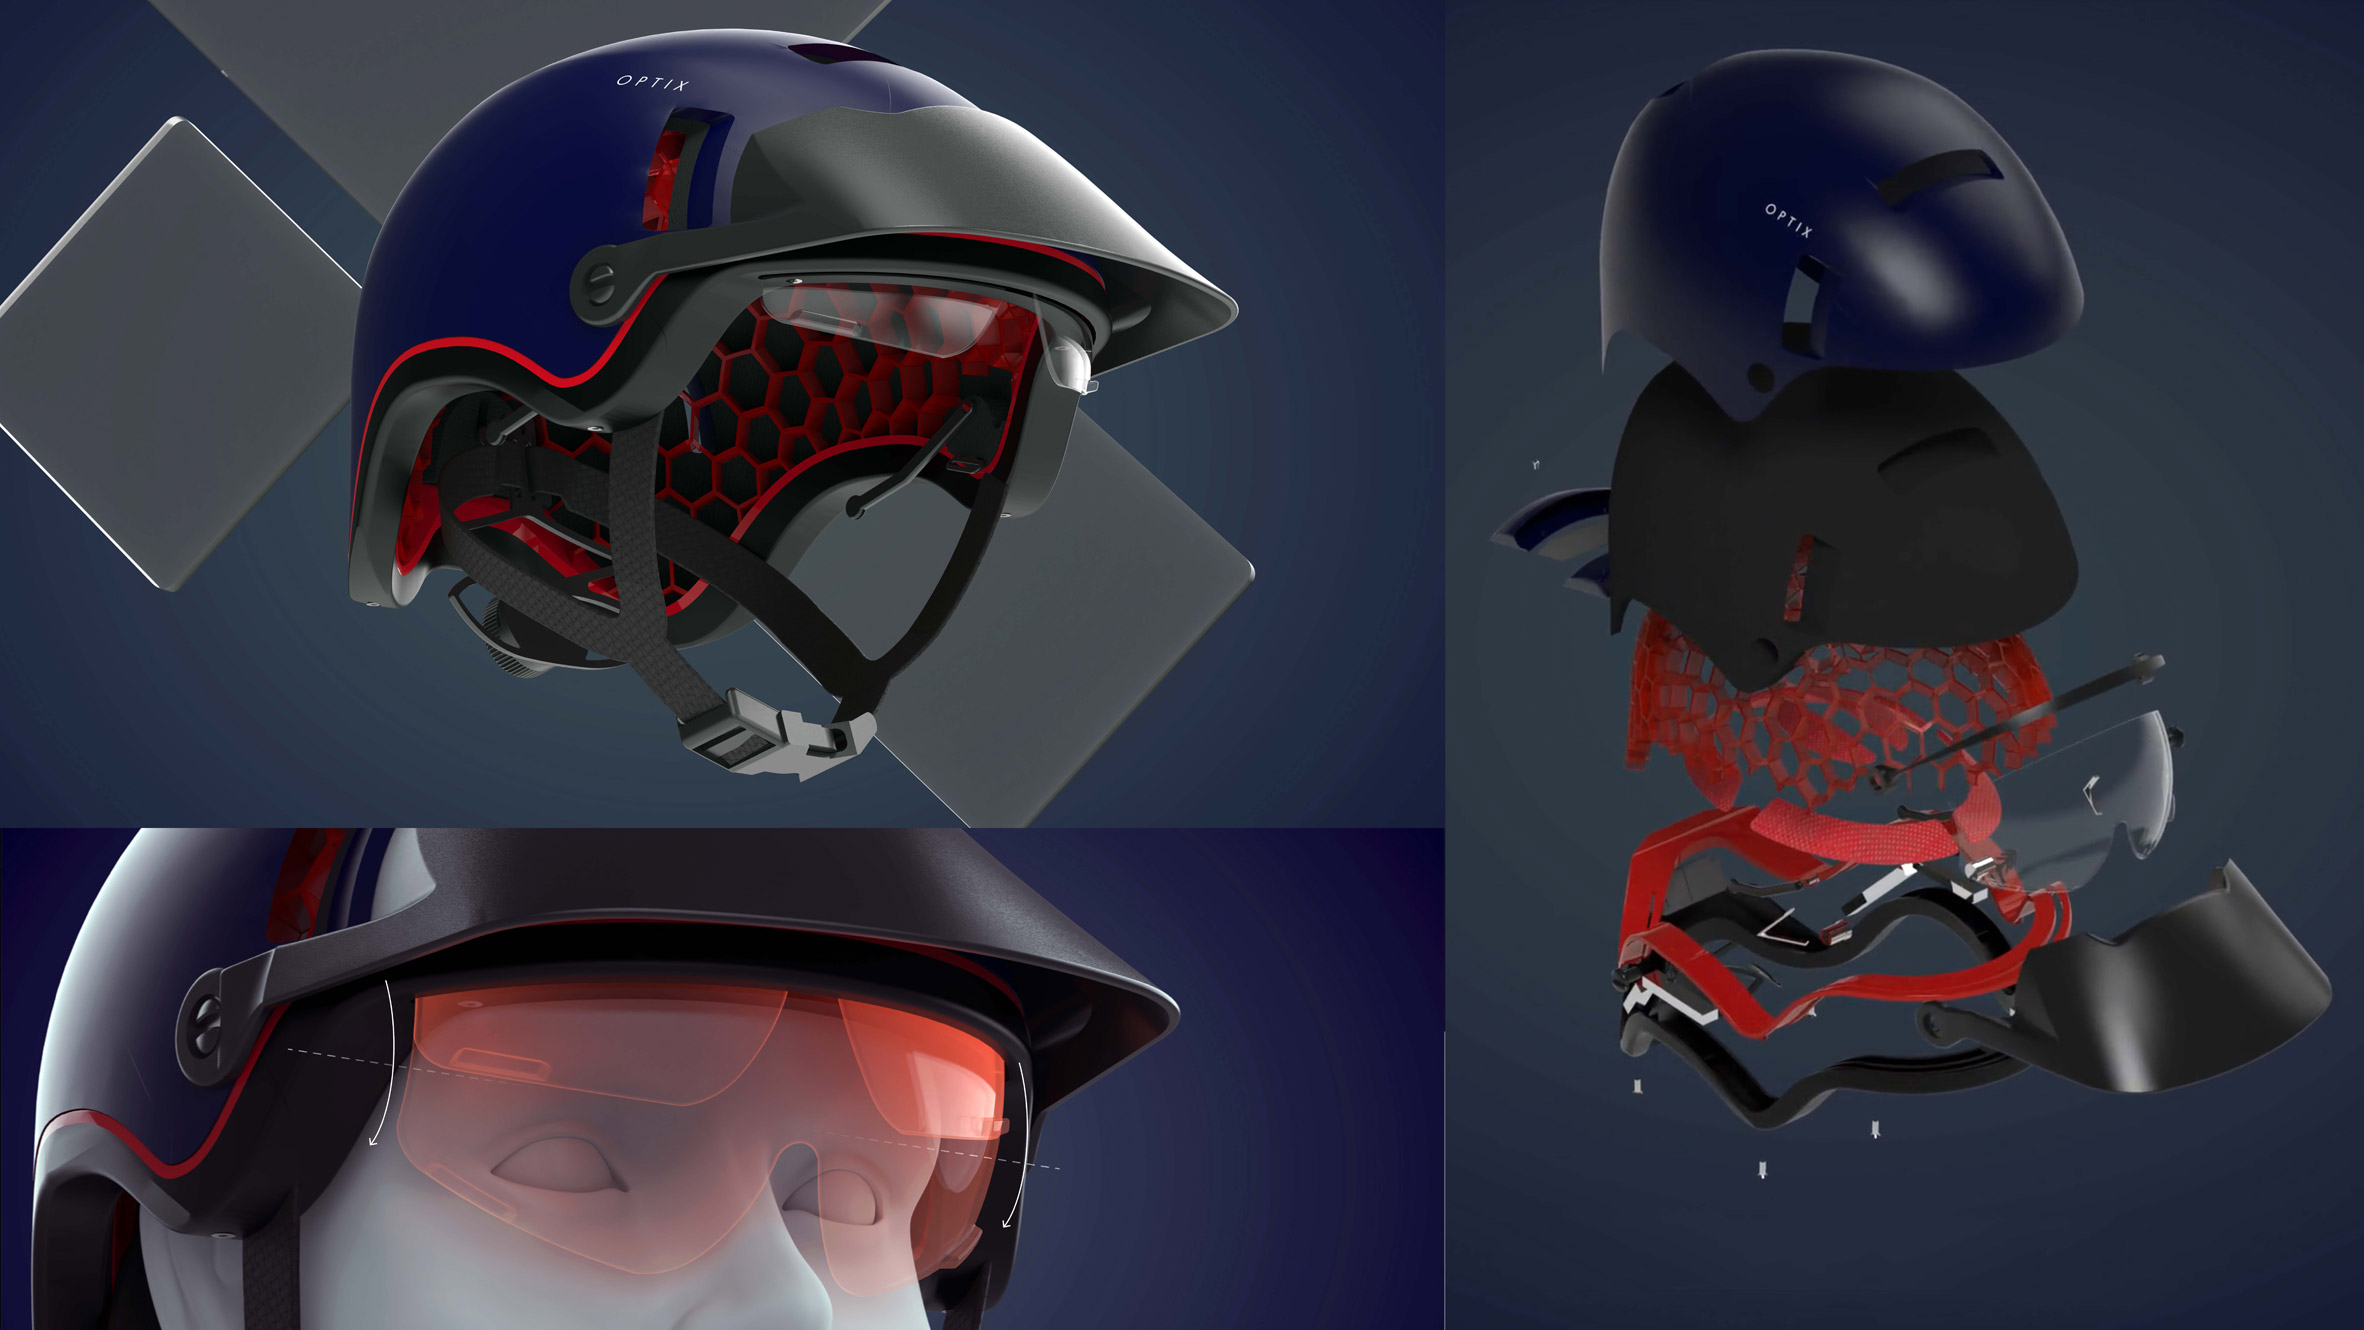 Visualisations of helmet with red accents